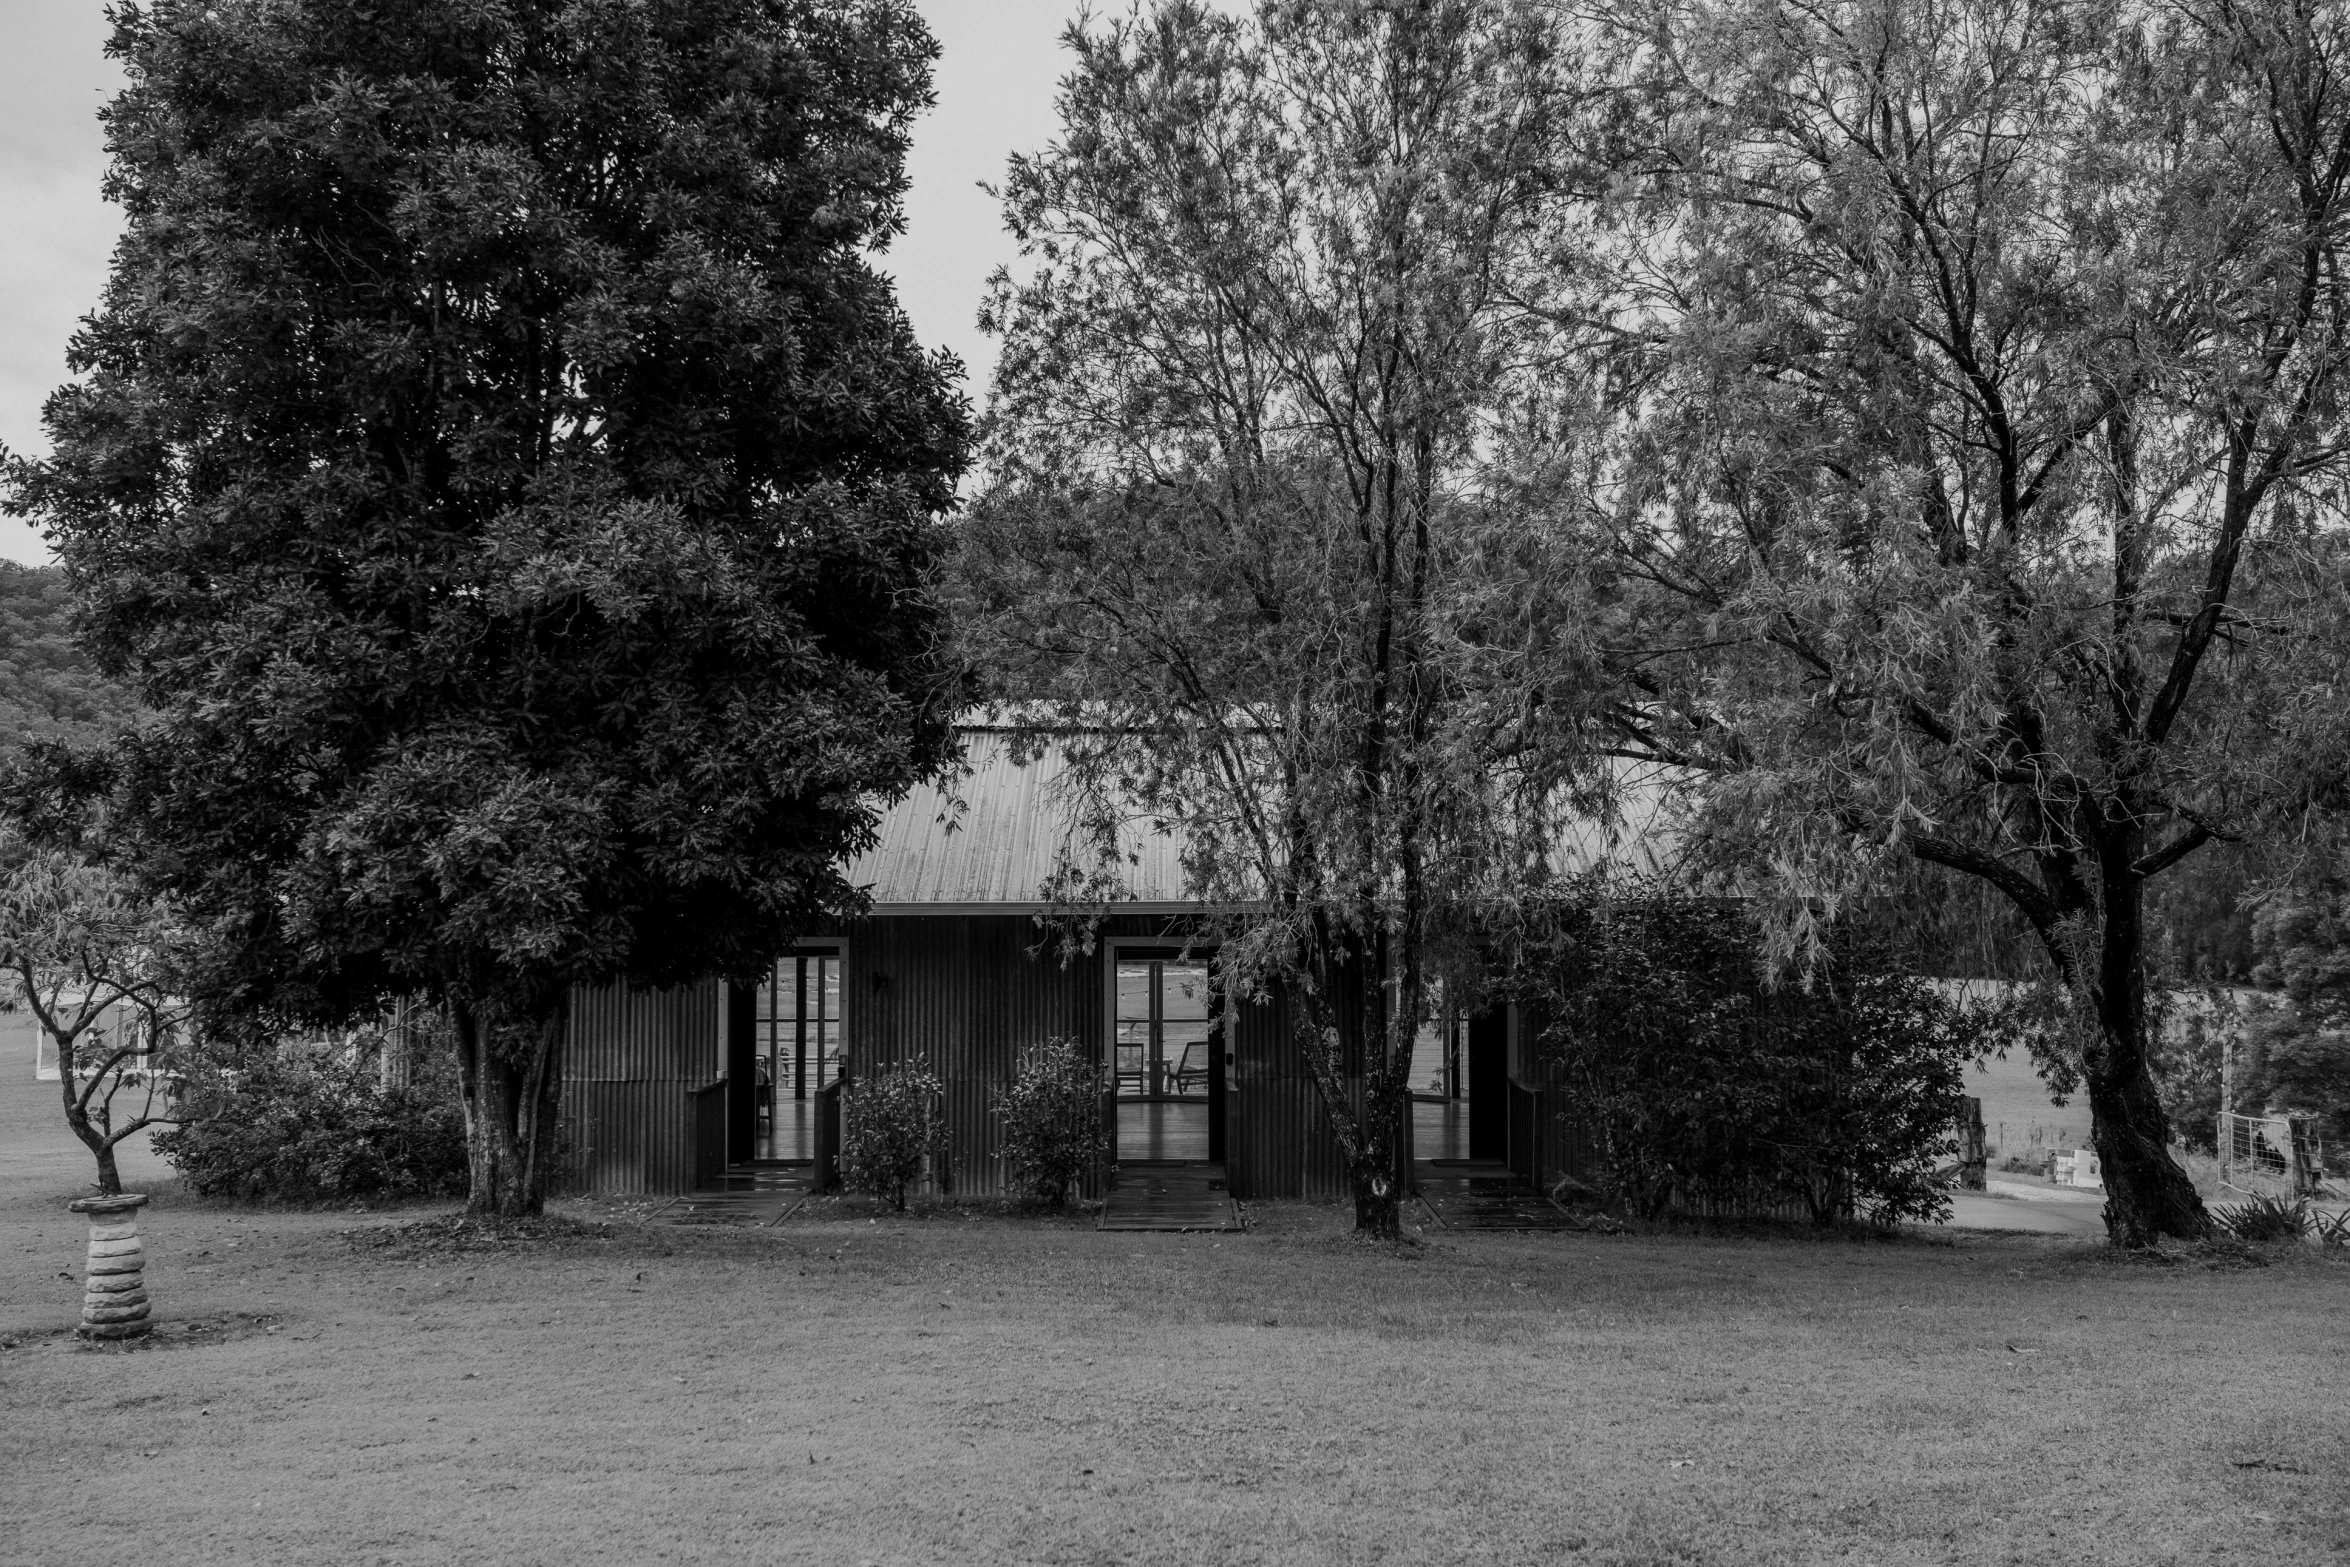 black and white po of an old building surrounded by trees